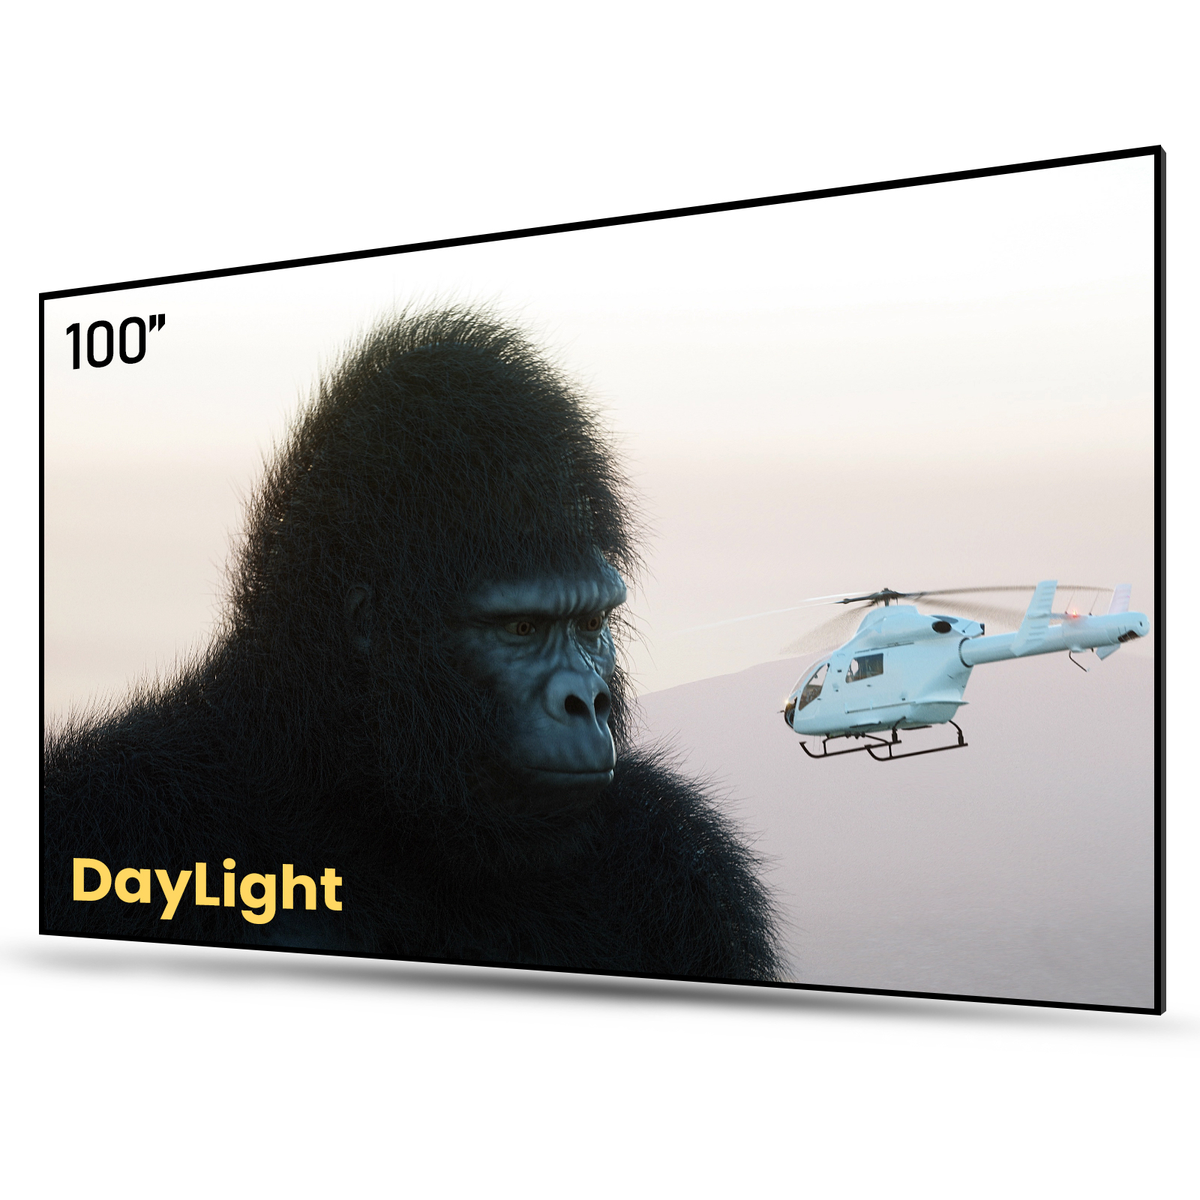 AWOL 120Inch ALR Projector Cinematic Screen UST 16:9 170° Viewing Angle Ambient 95% Ceiling Light Giant Cinema Screen